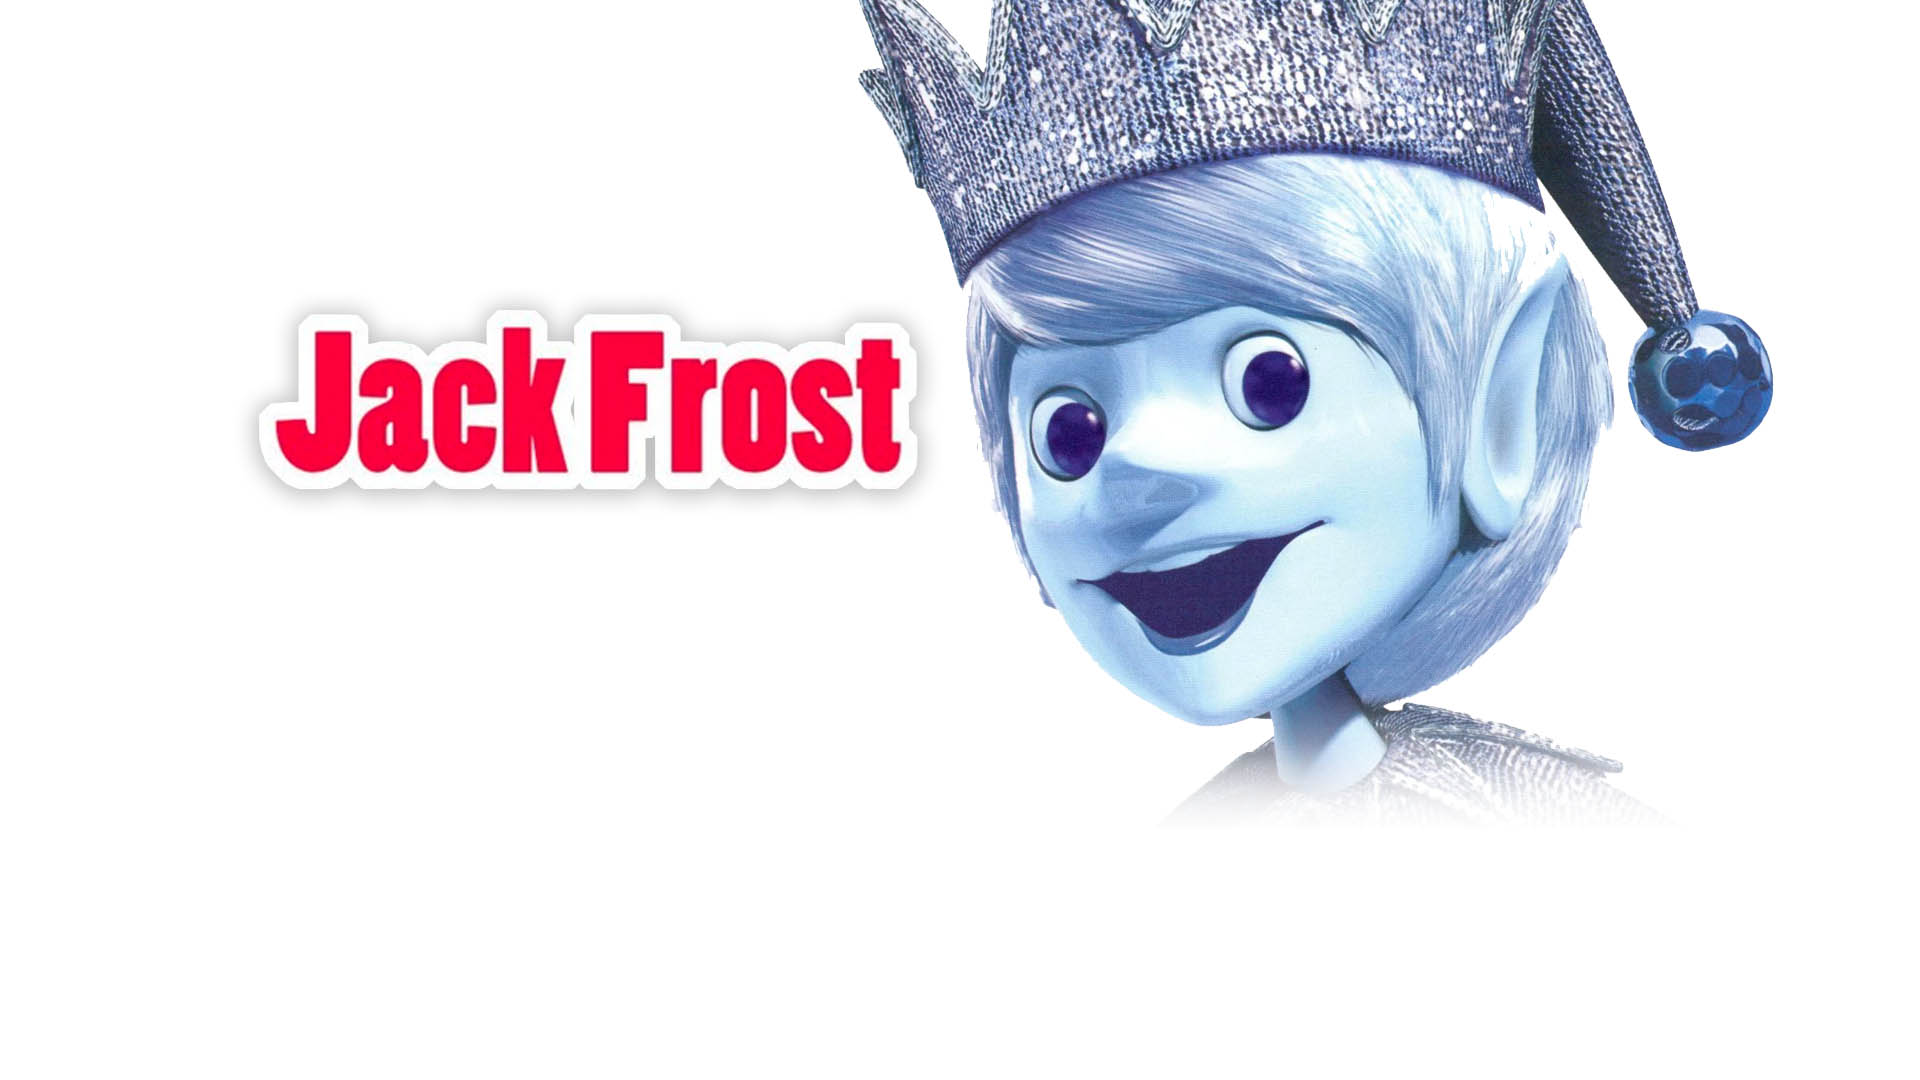 Watch Jack Frost (1979) Online | Stream Full Movies